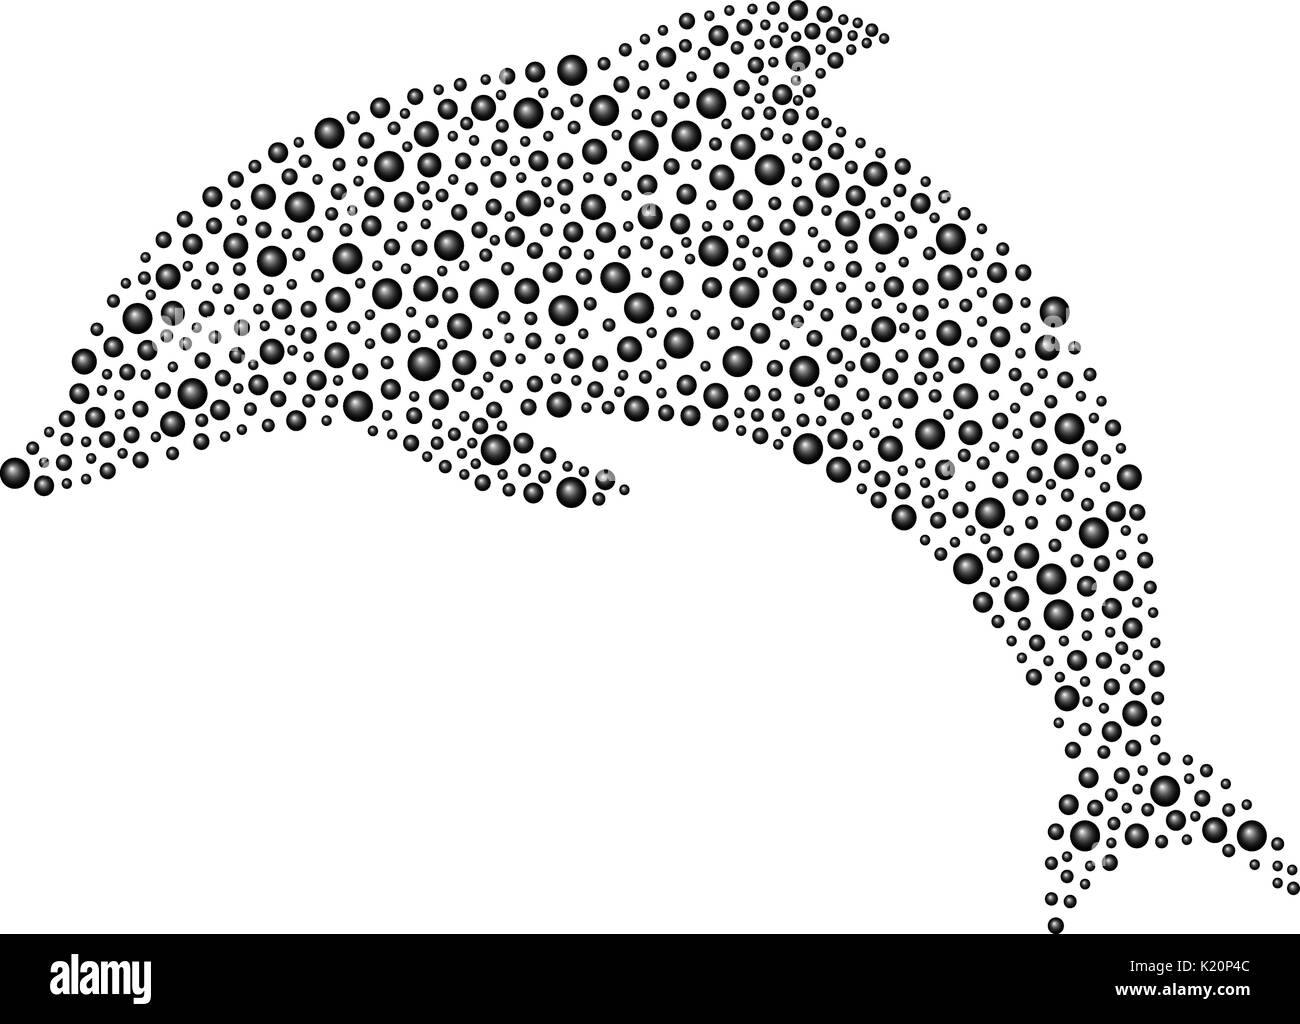 Dolphin made of black balls on white background Stock Vector